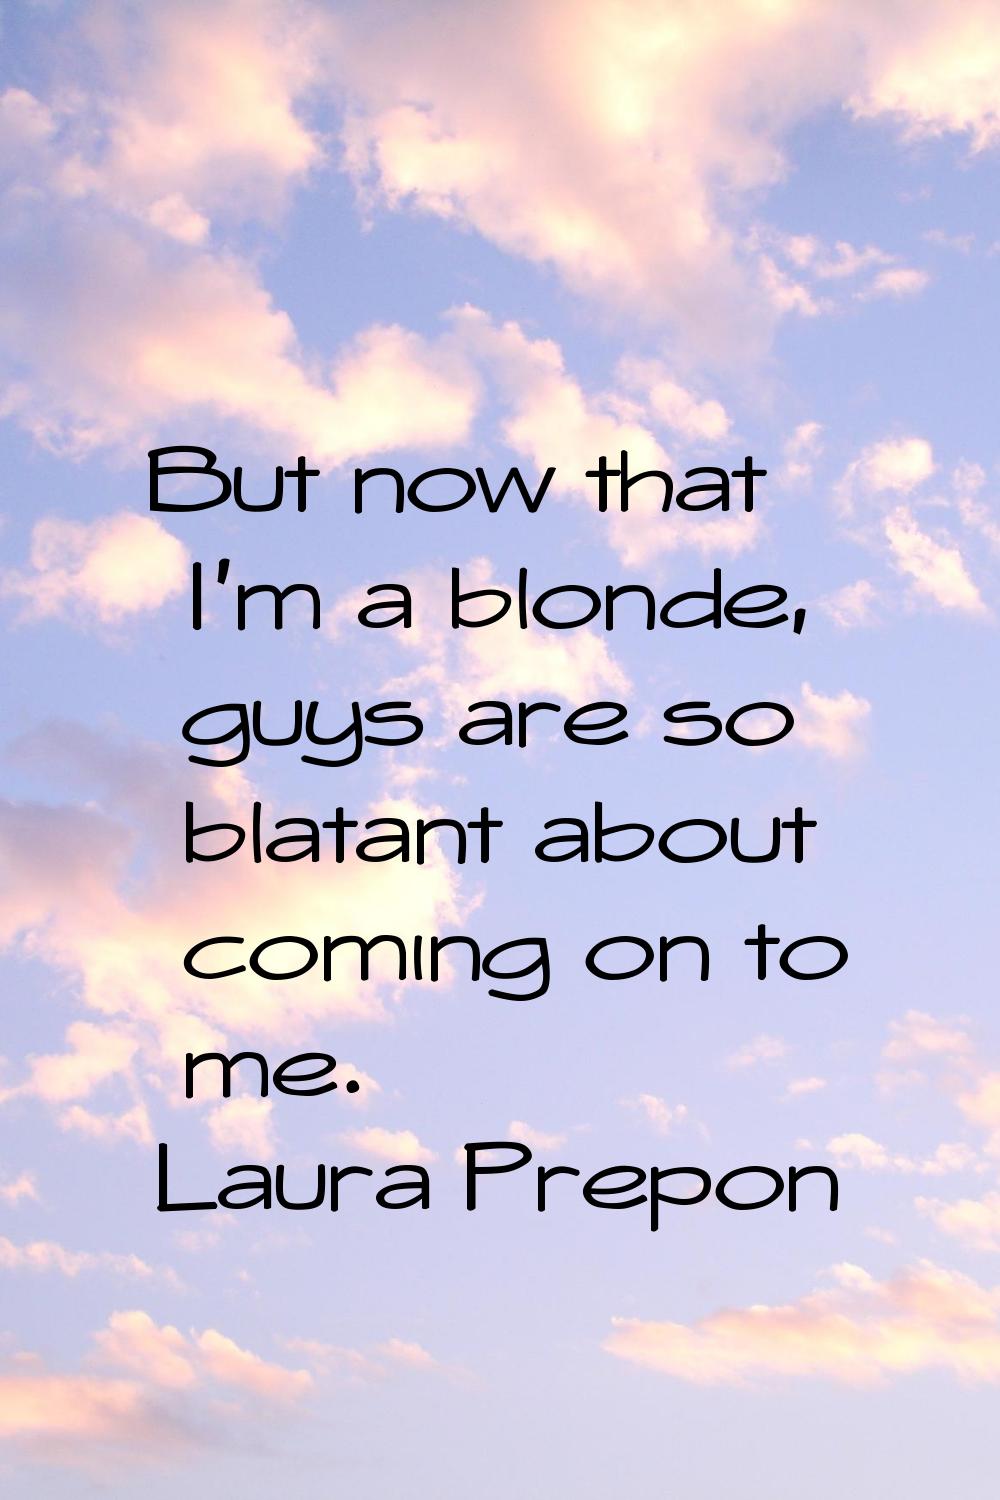 But now that I'm a blonde, guys are so blatant about coming on to me.